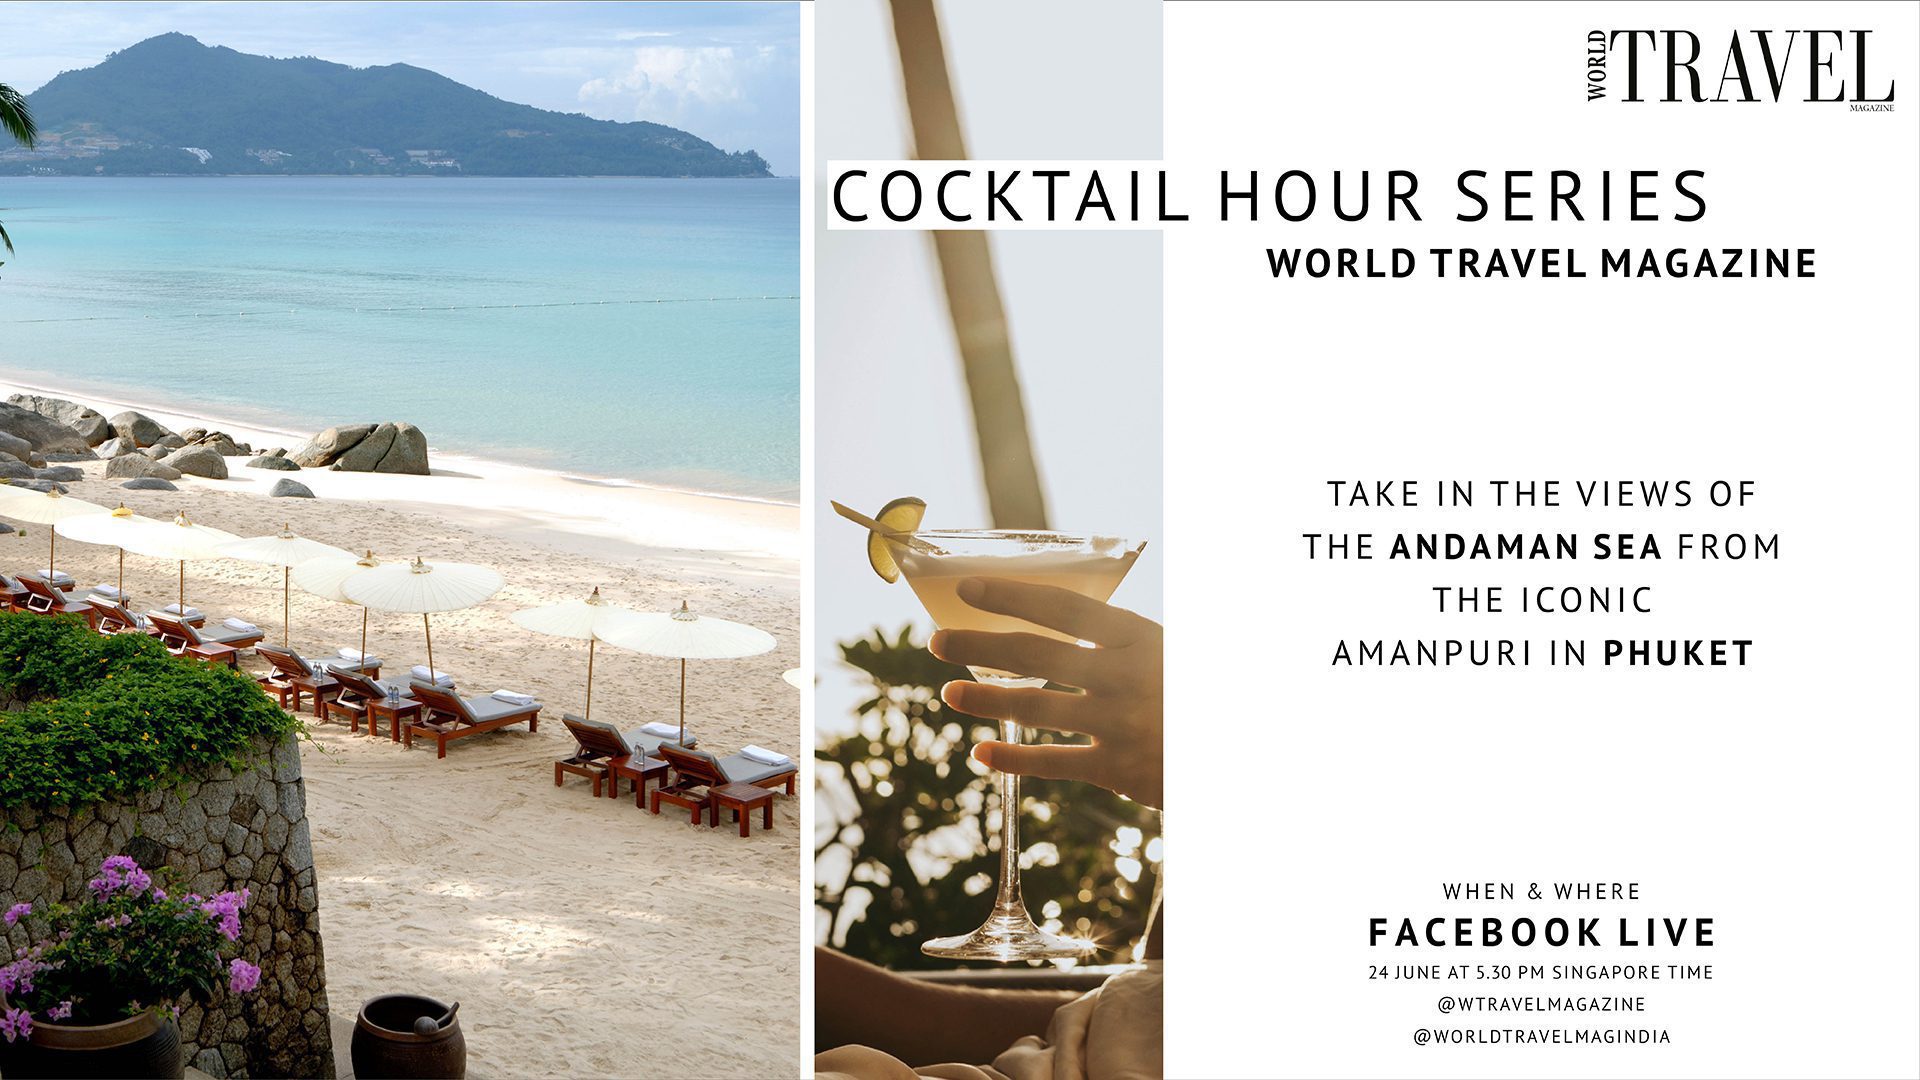 Cocktail hour episode 3 Amanpuri - LIVE in Phuket